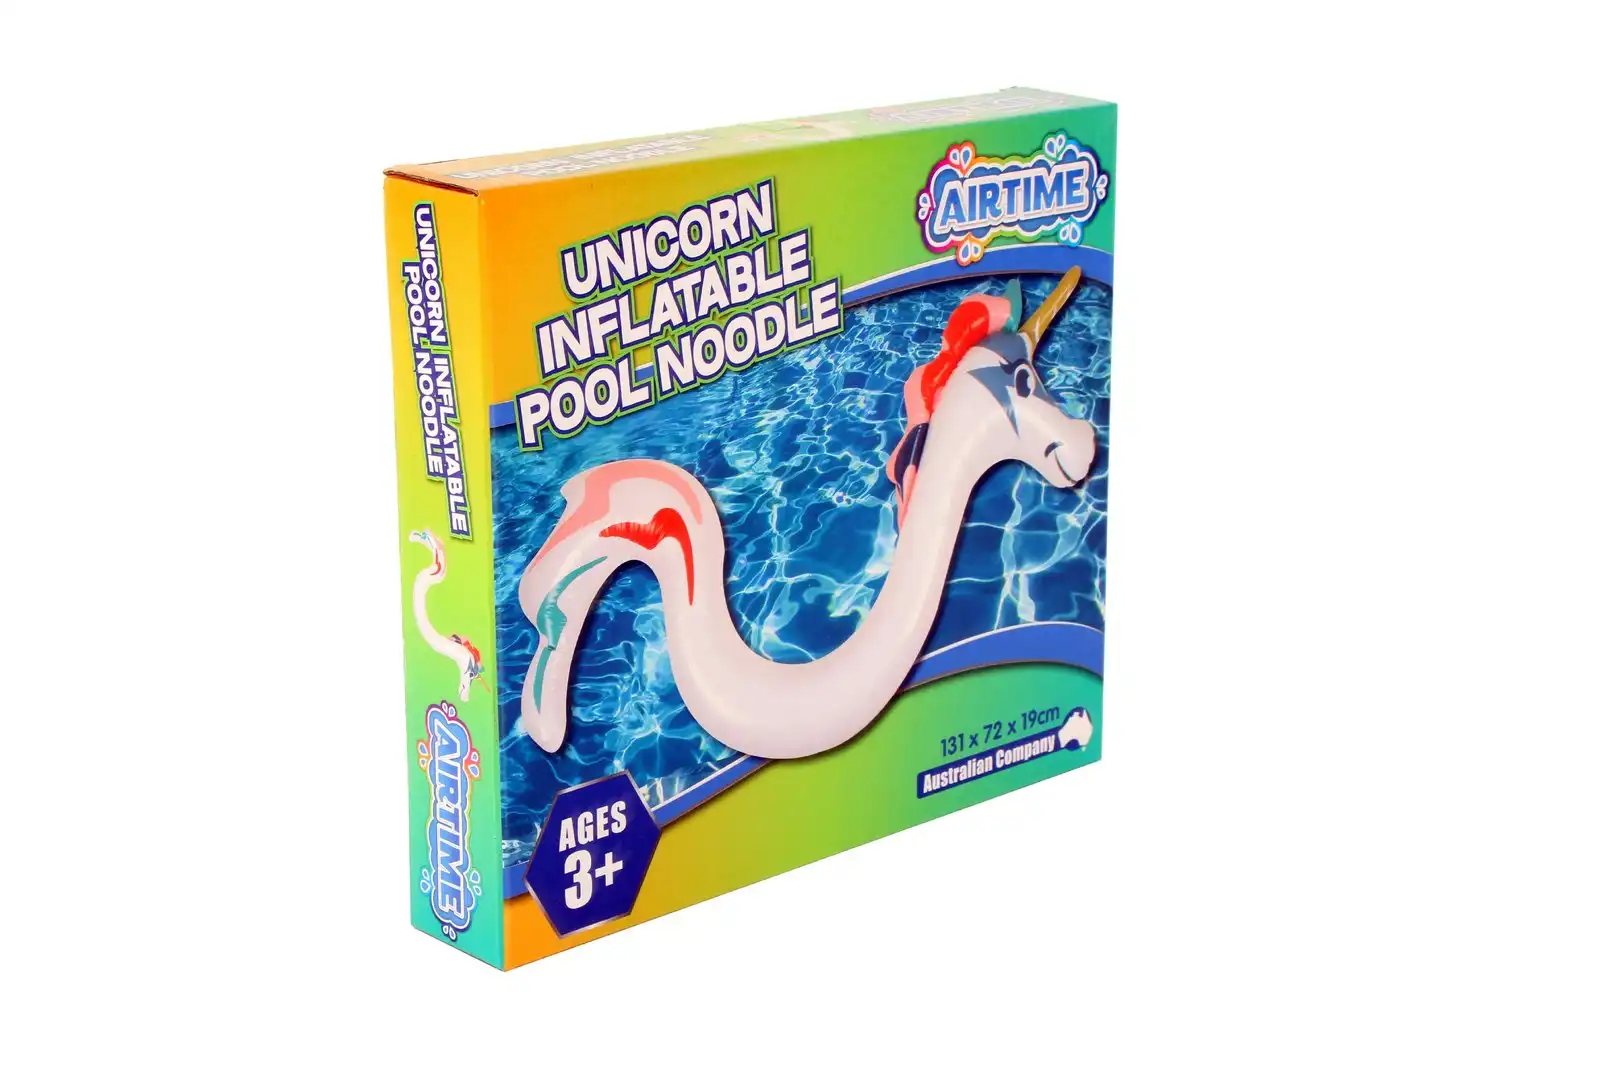 Airtime 131x72cm Unicorn Inflatable Pool/Beach Noodle Floating Kids/Children Toy